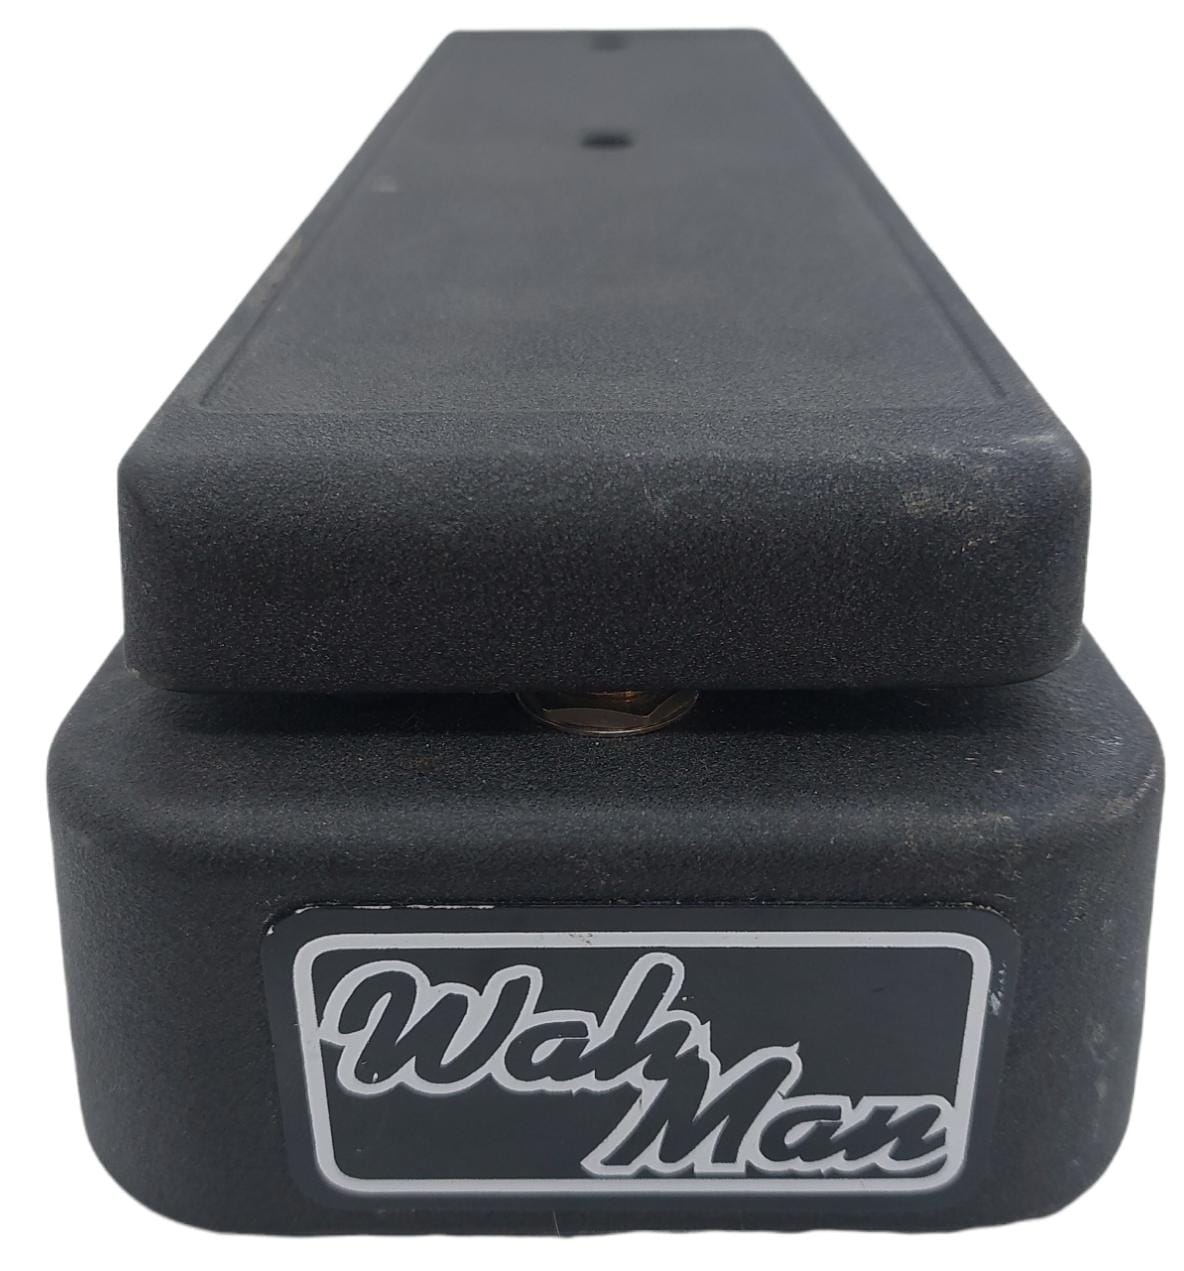 Stagg Wah Man Pedal